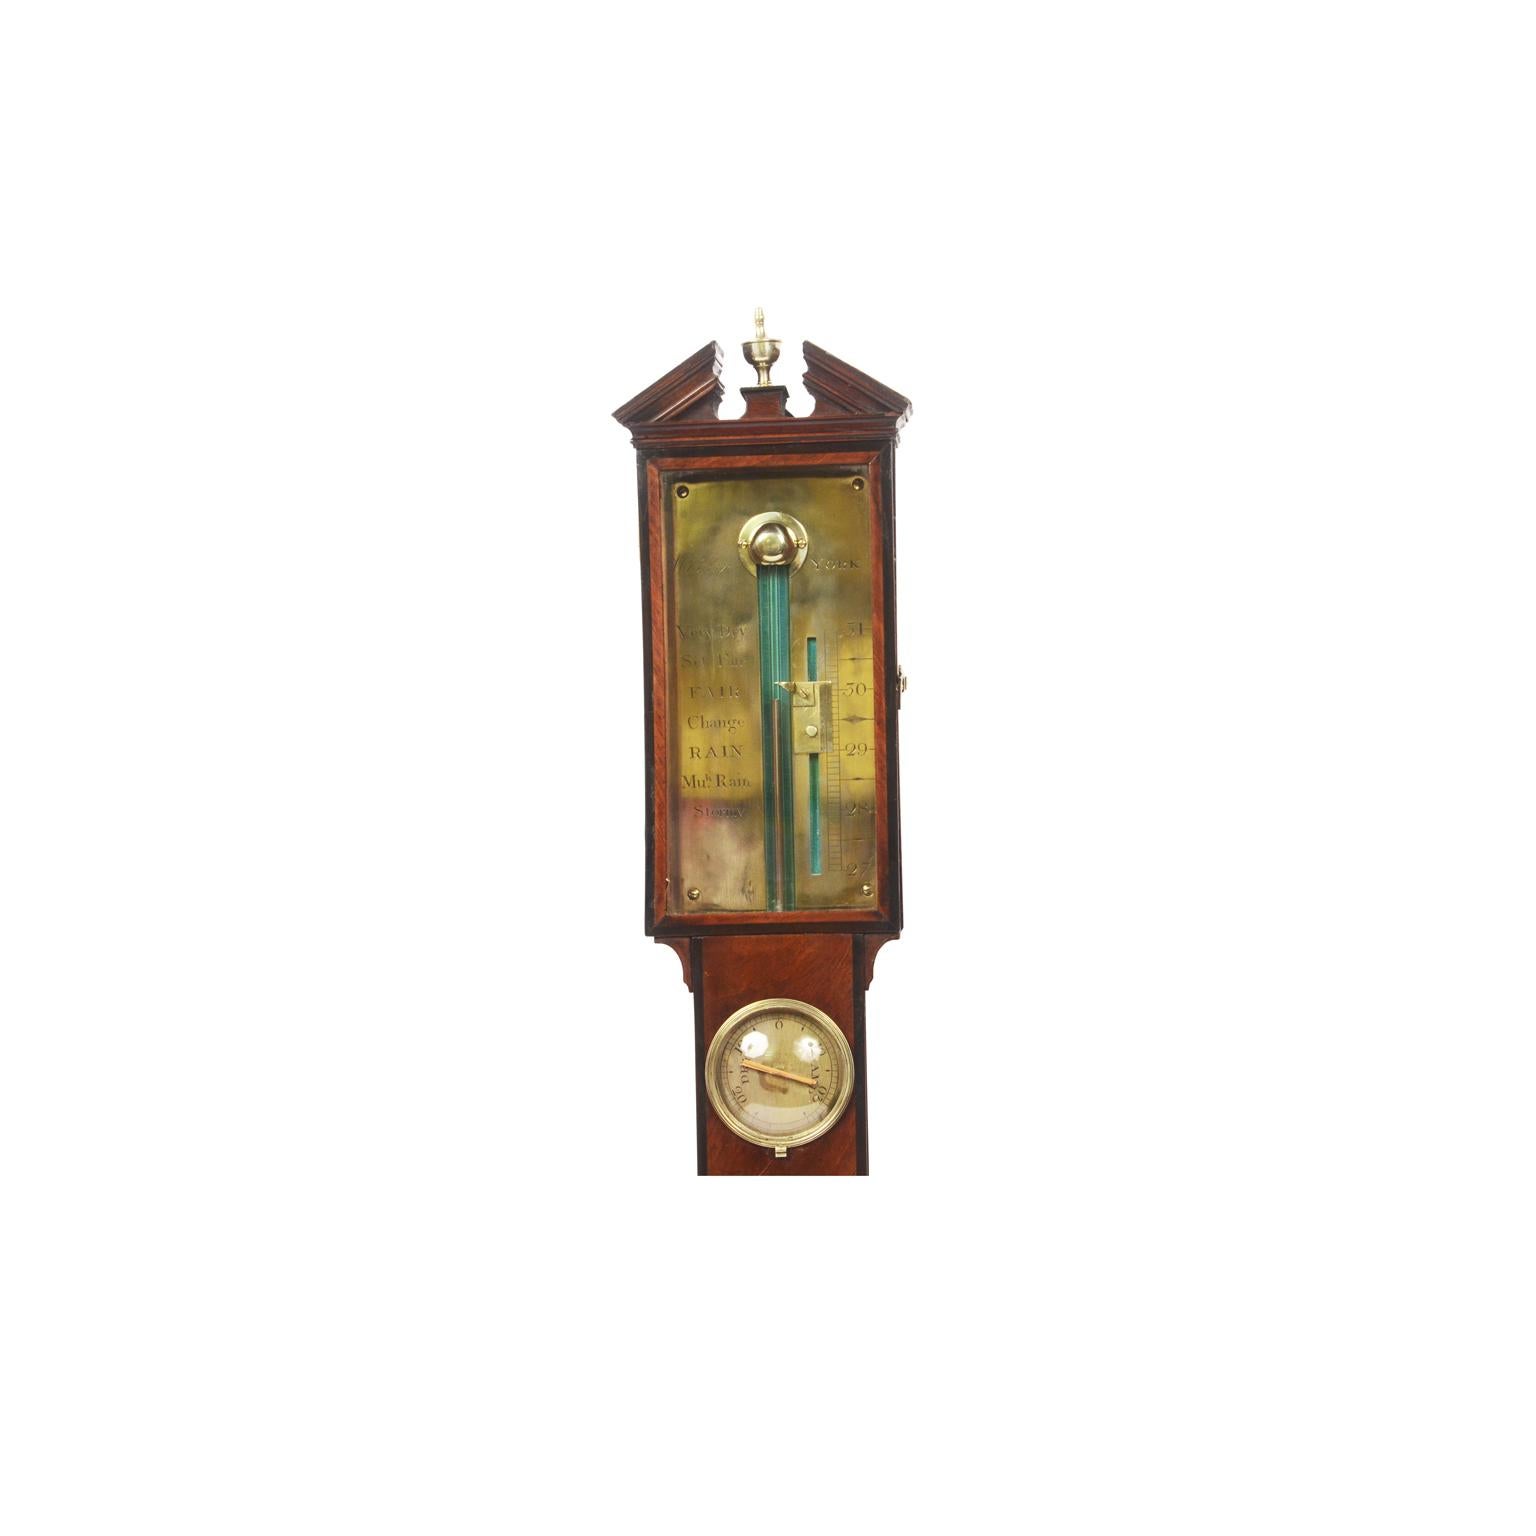 English barometer of mahogany wood signed Wisker York from the early 19th century, complete with reading vernier for checking the variation in pressure, large thermometer and hygrometer. Height 103 cm - 40.55 inches, width 12.5 cm - 4.9 inches,